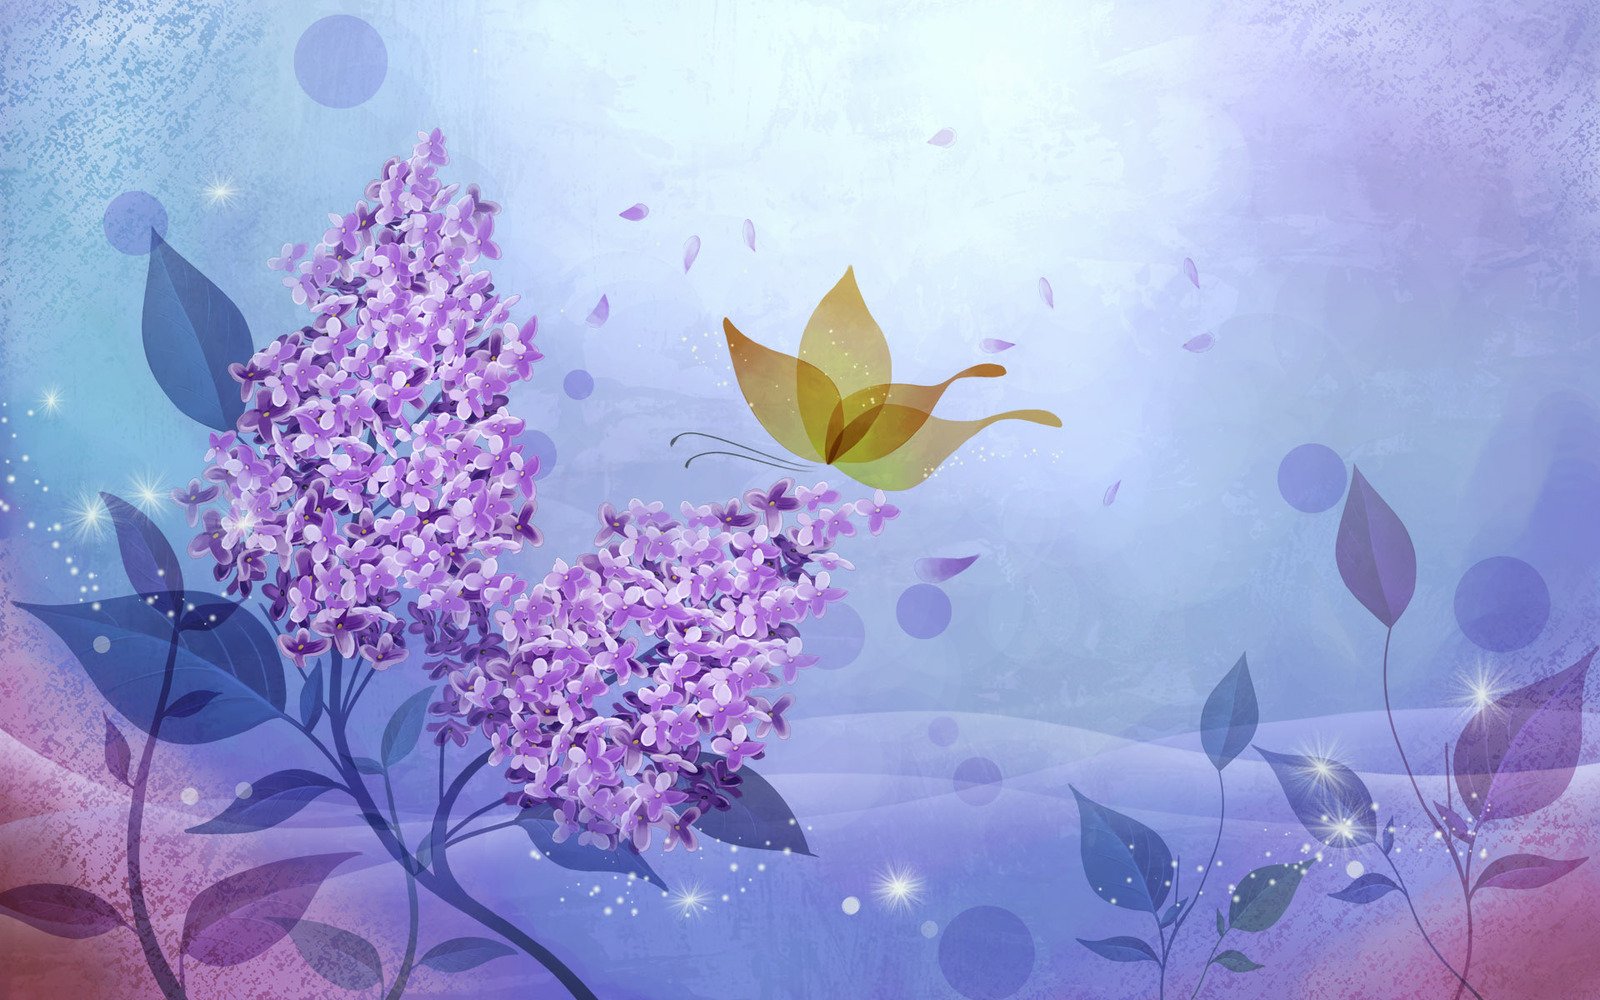 the lilac and leaves painting is made to look like an image